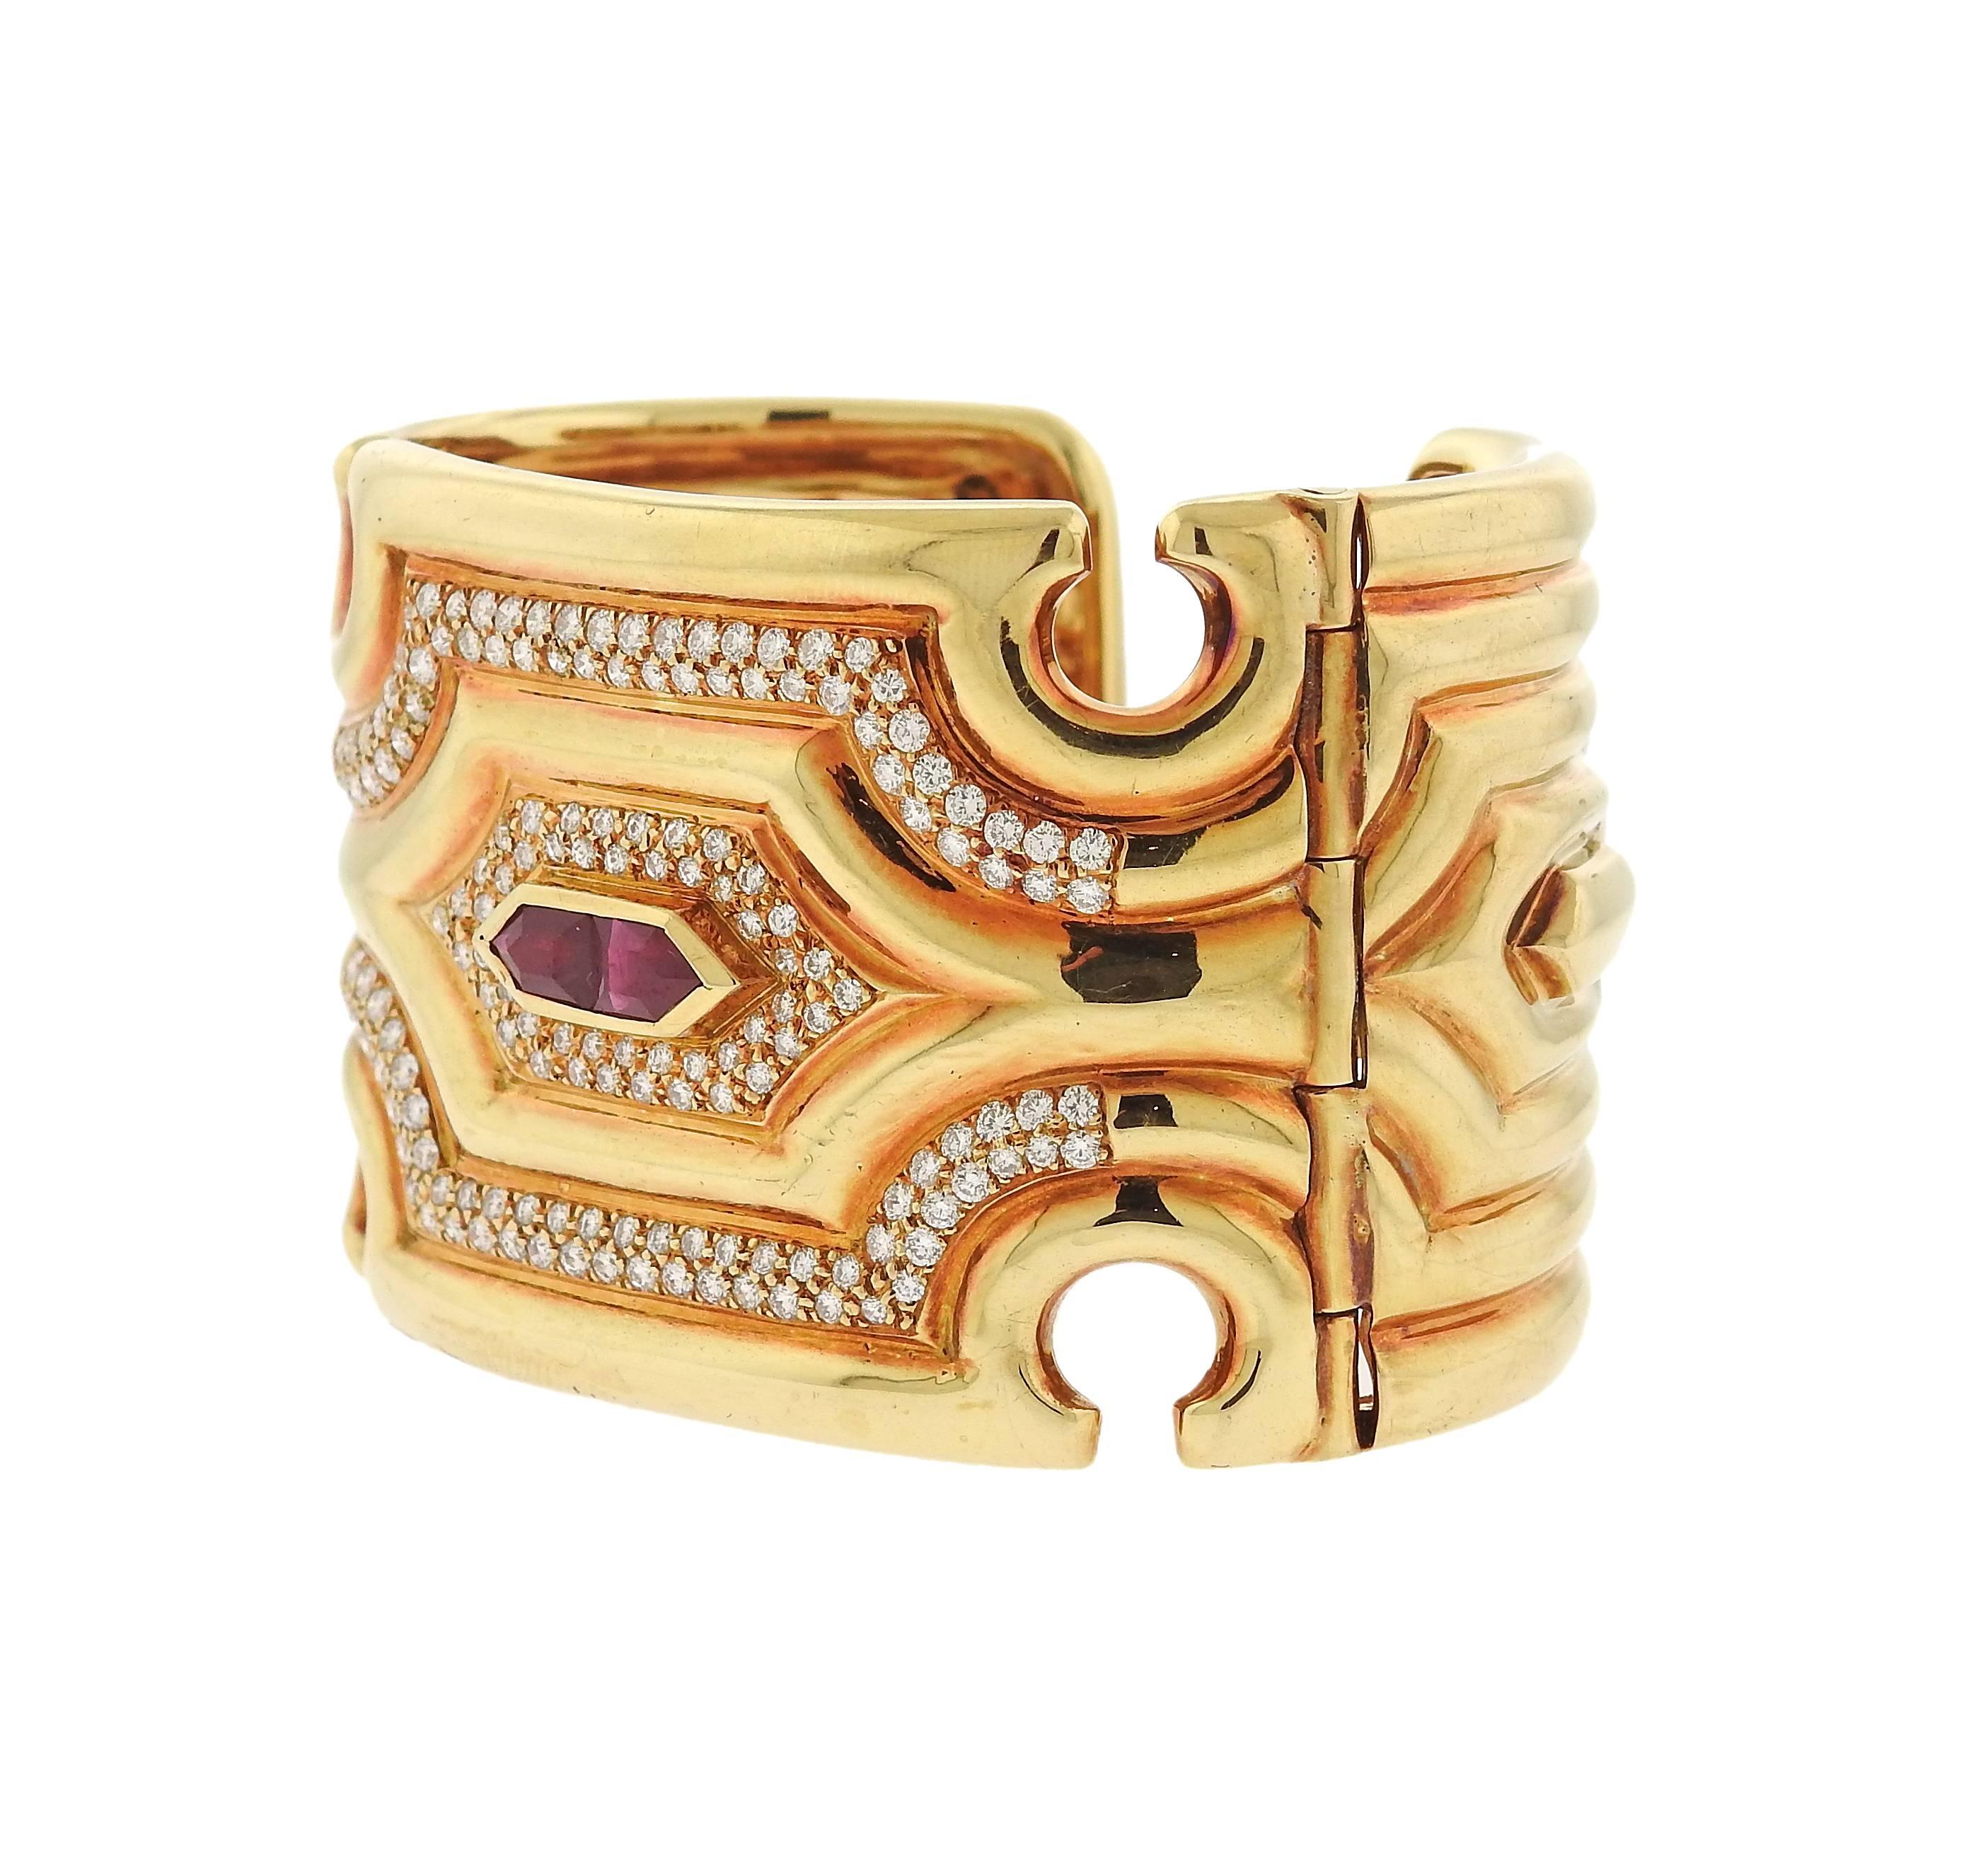 Impressive 18k yellow gold cuff bracelet, set with approximately 2.60ctw in diamonds and rubies. Bracelet will fit approx. 6 1/4" wrist and is 40mm wide , weight - 134.4 grams. Marked 750. 